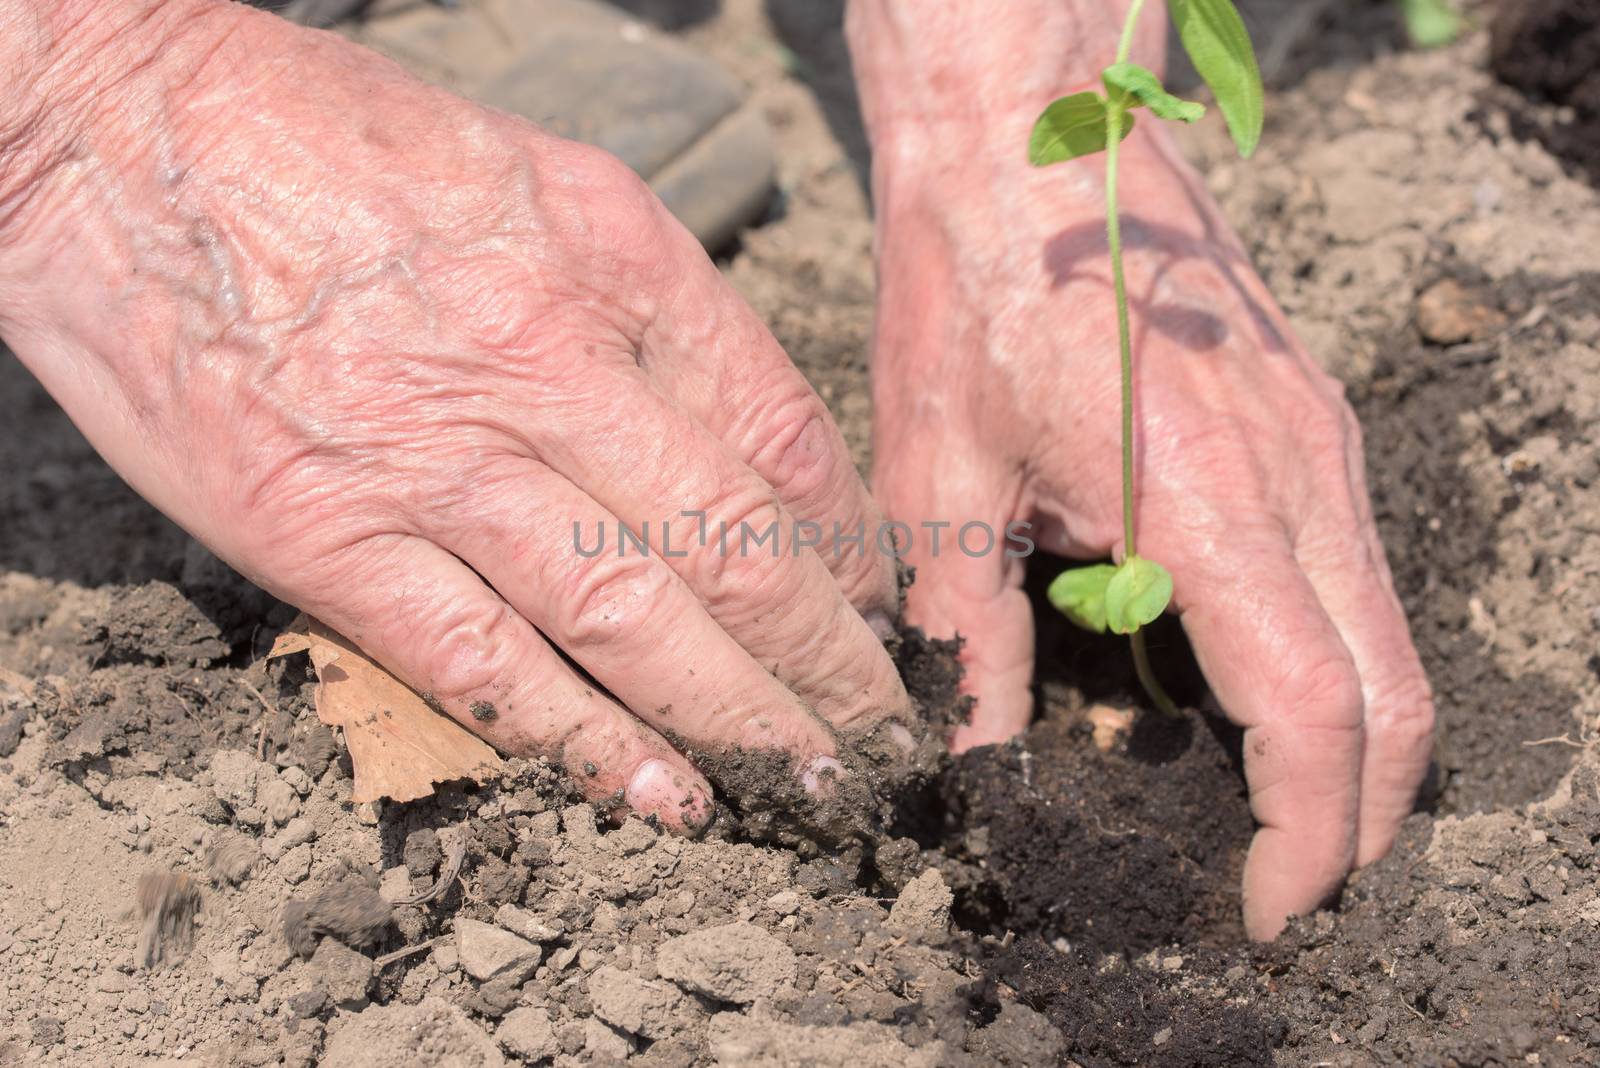 Hands of farmer growing plant. Hands of the elderly person